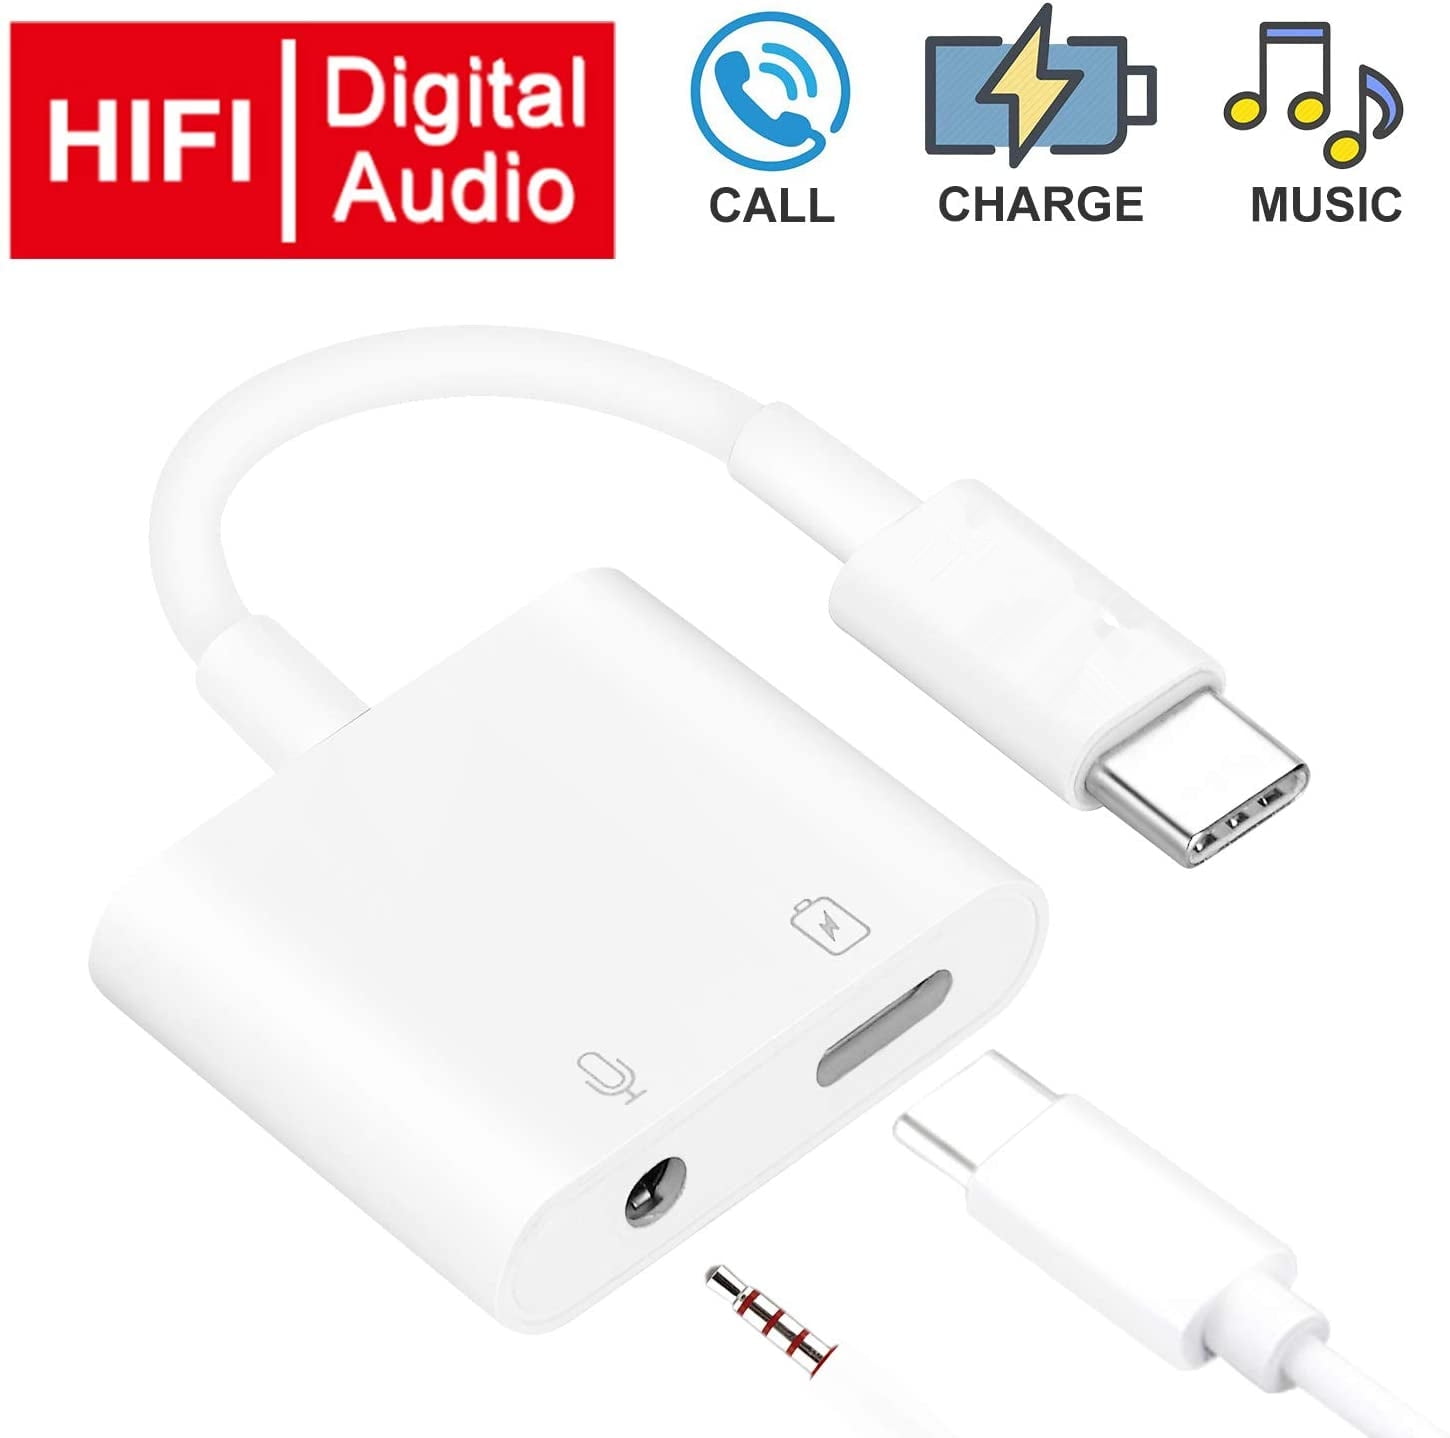 During ~ linkage Nod USB C to Headphone Jack Adapter with 3.5mm Aux Audio and Type c Charger  Dongle Converter USBC Earphone Adaptor for iPad Pro 12.9" Essential HTC U11  Google Pixel 3 3XL 2 XL